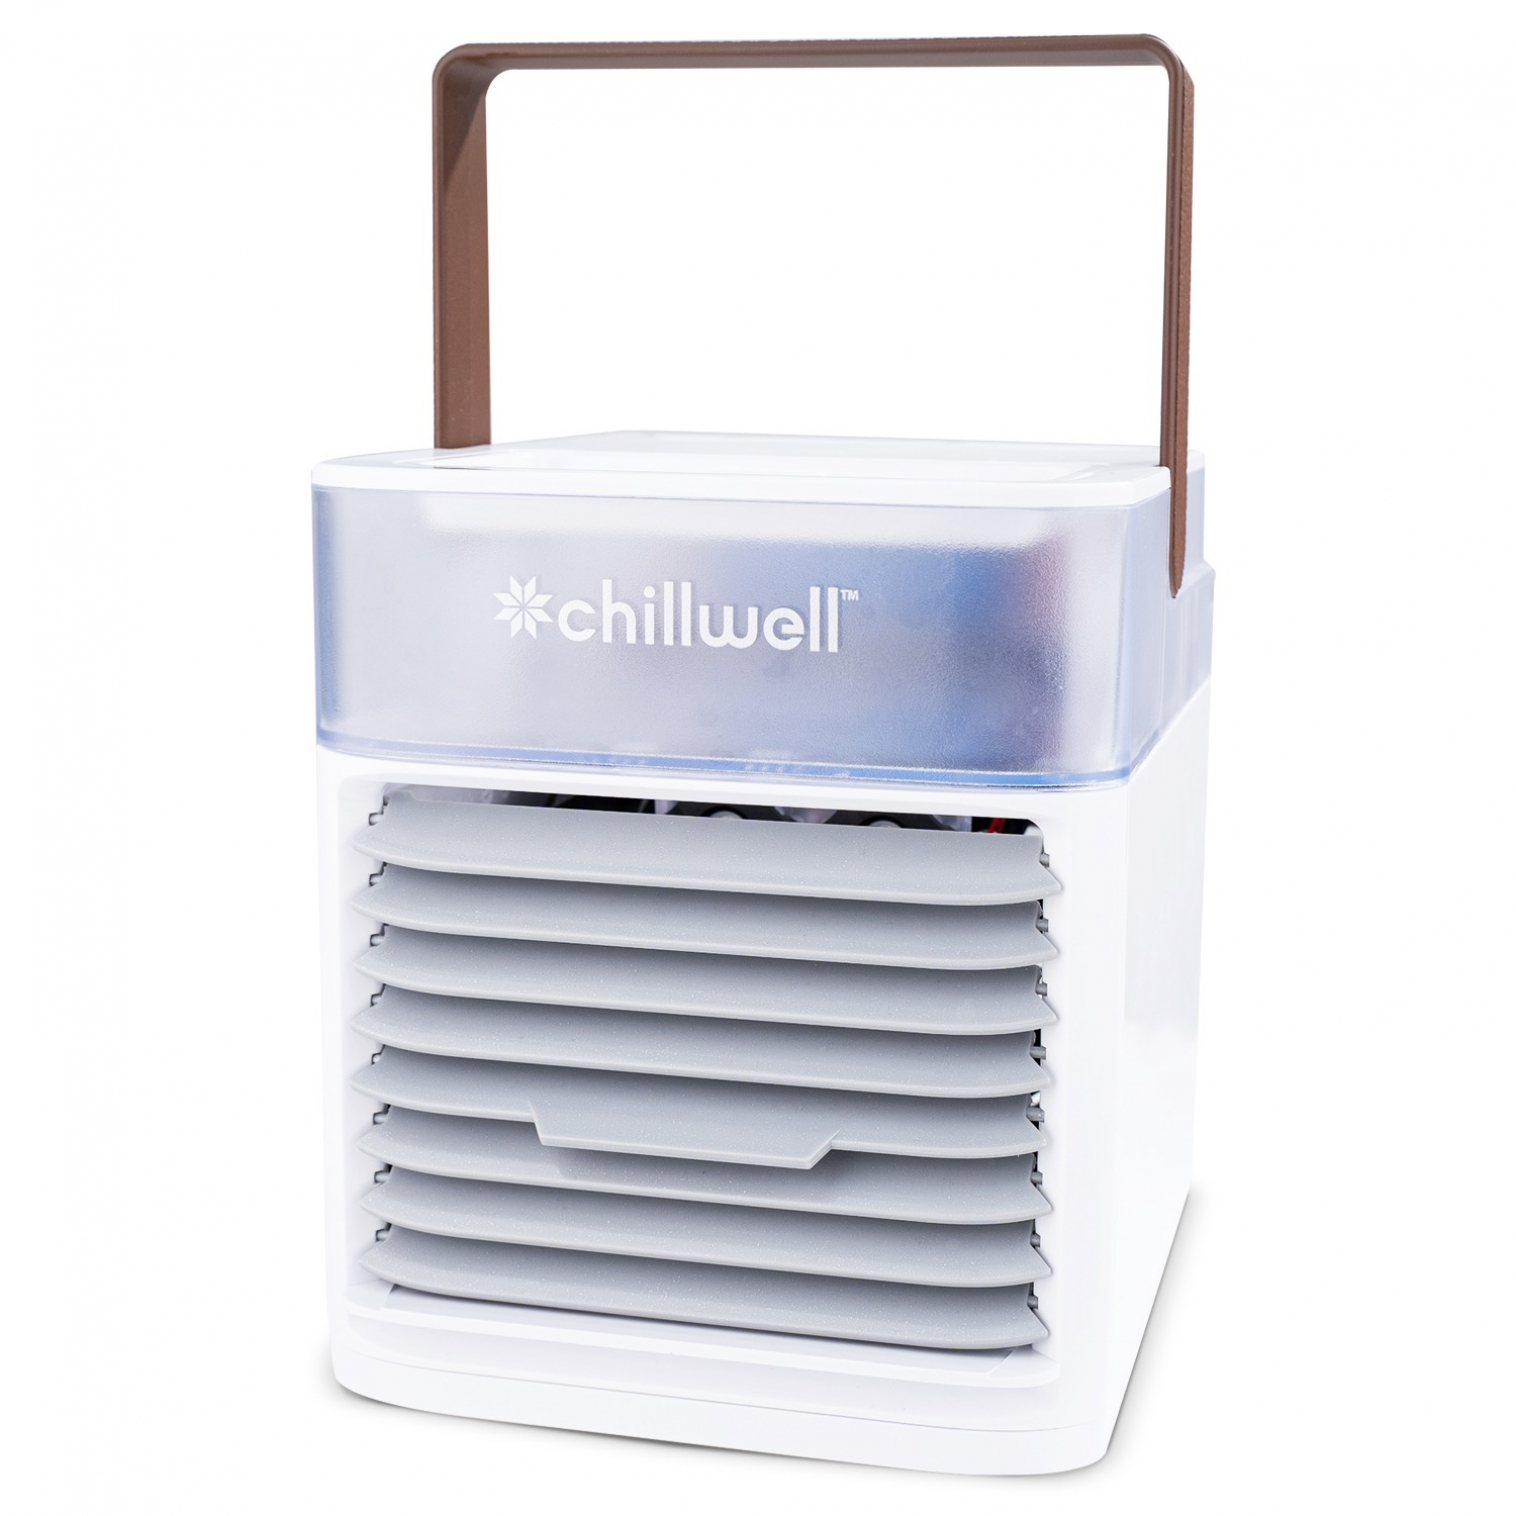 How To Use Chillwell Ac